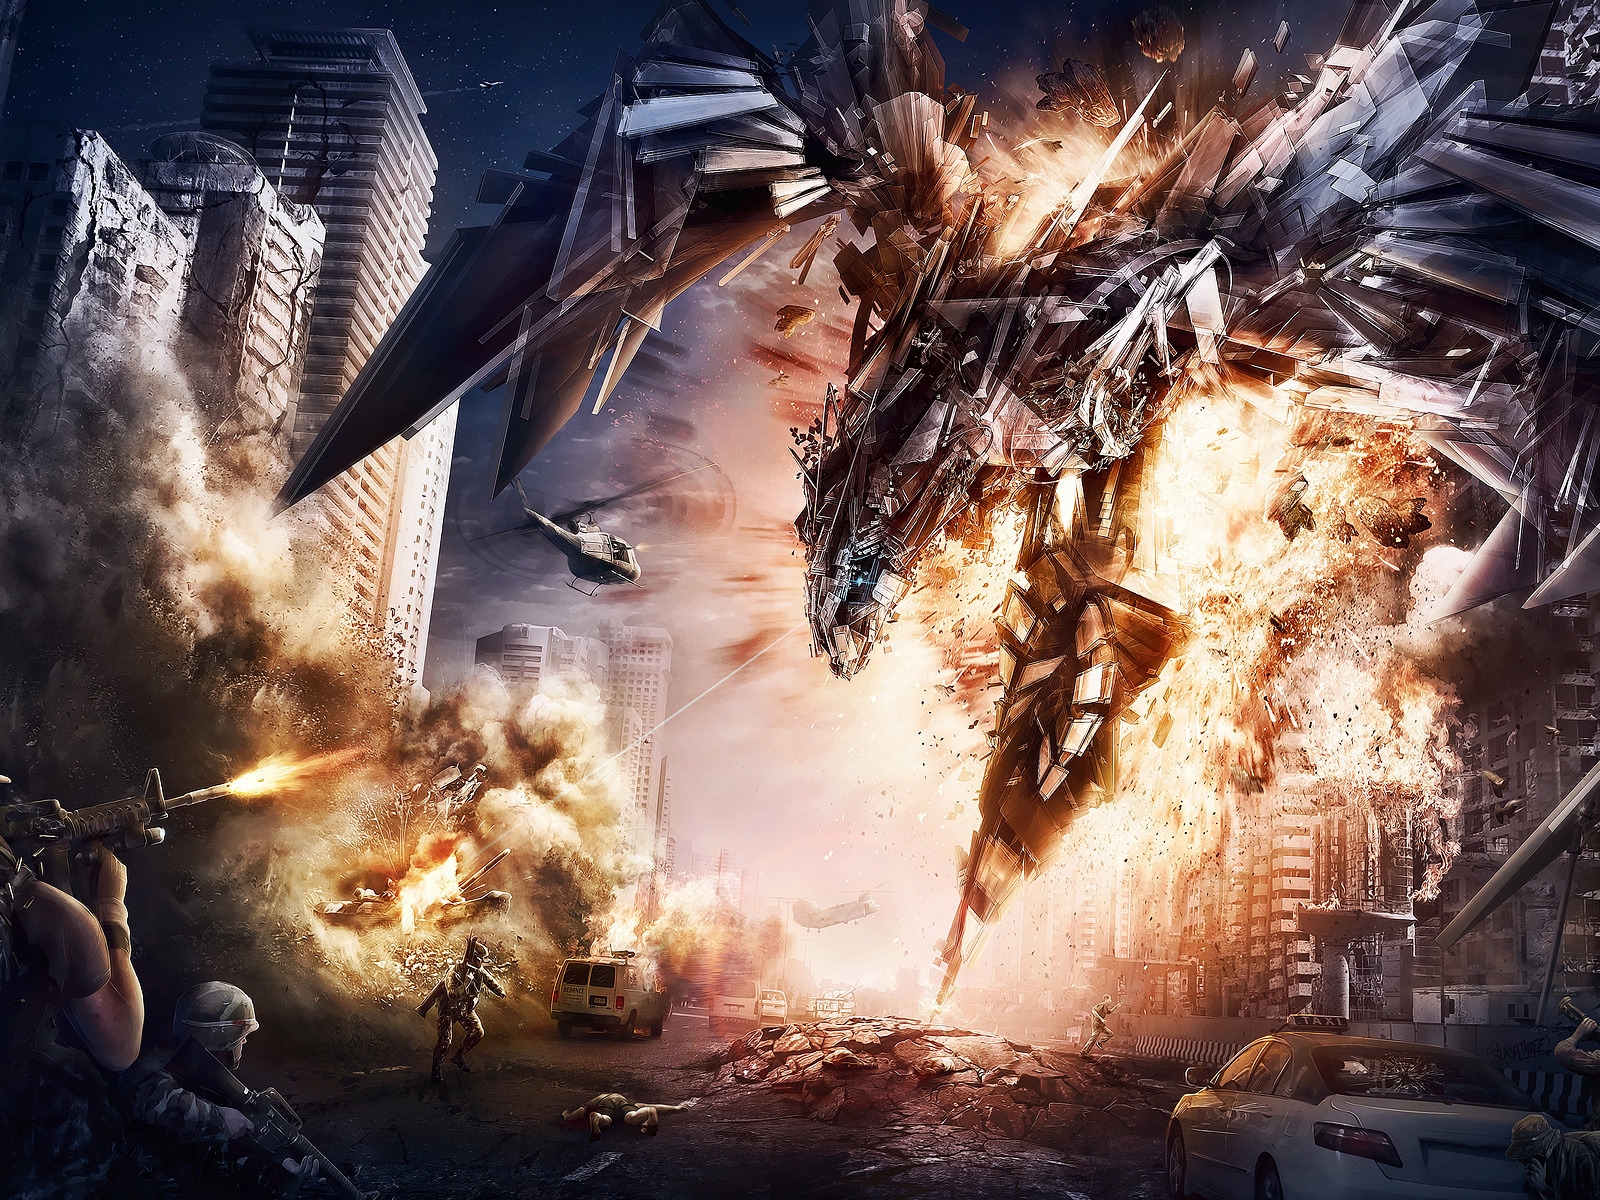 Transformers 4 Concept Art for 1600 x 1200 resolution